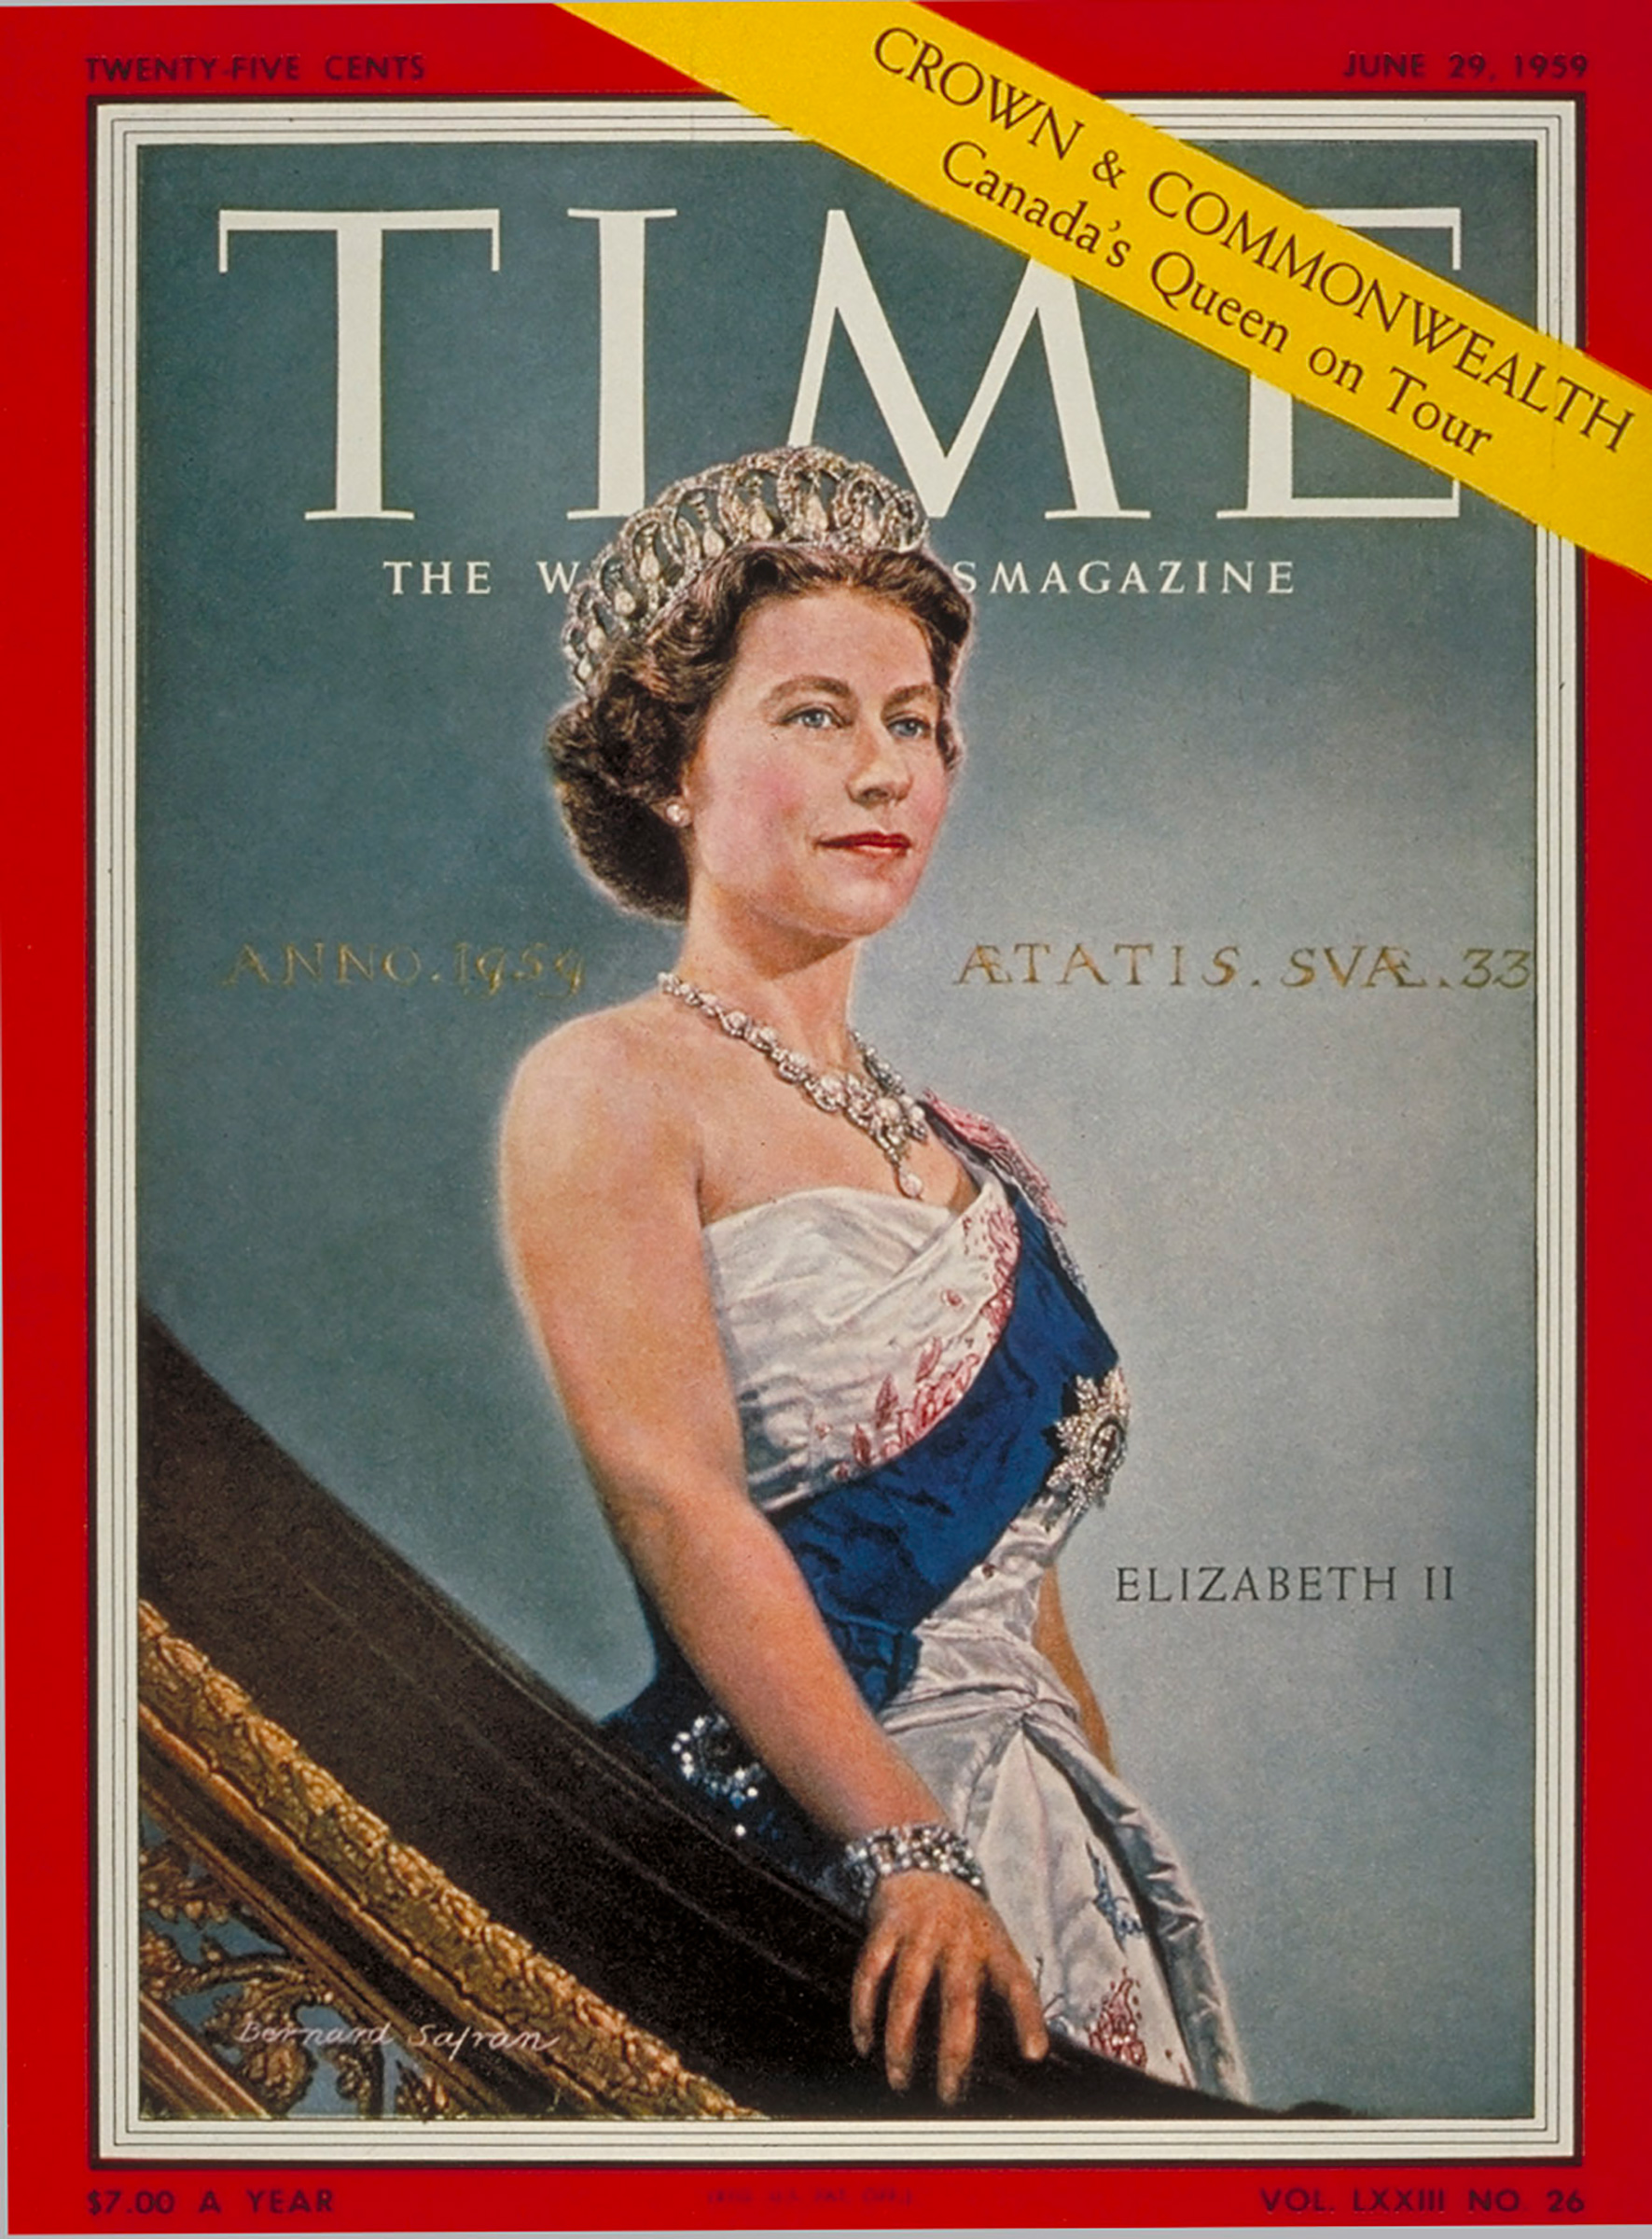 The Queen on the June 29, 1959, cover of TIME (TIME)